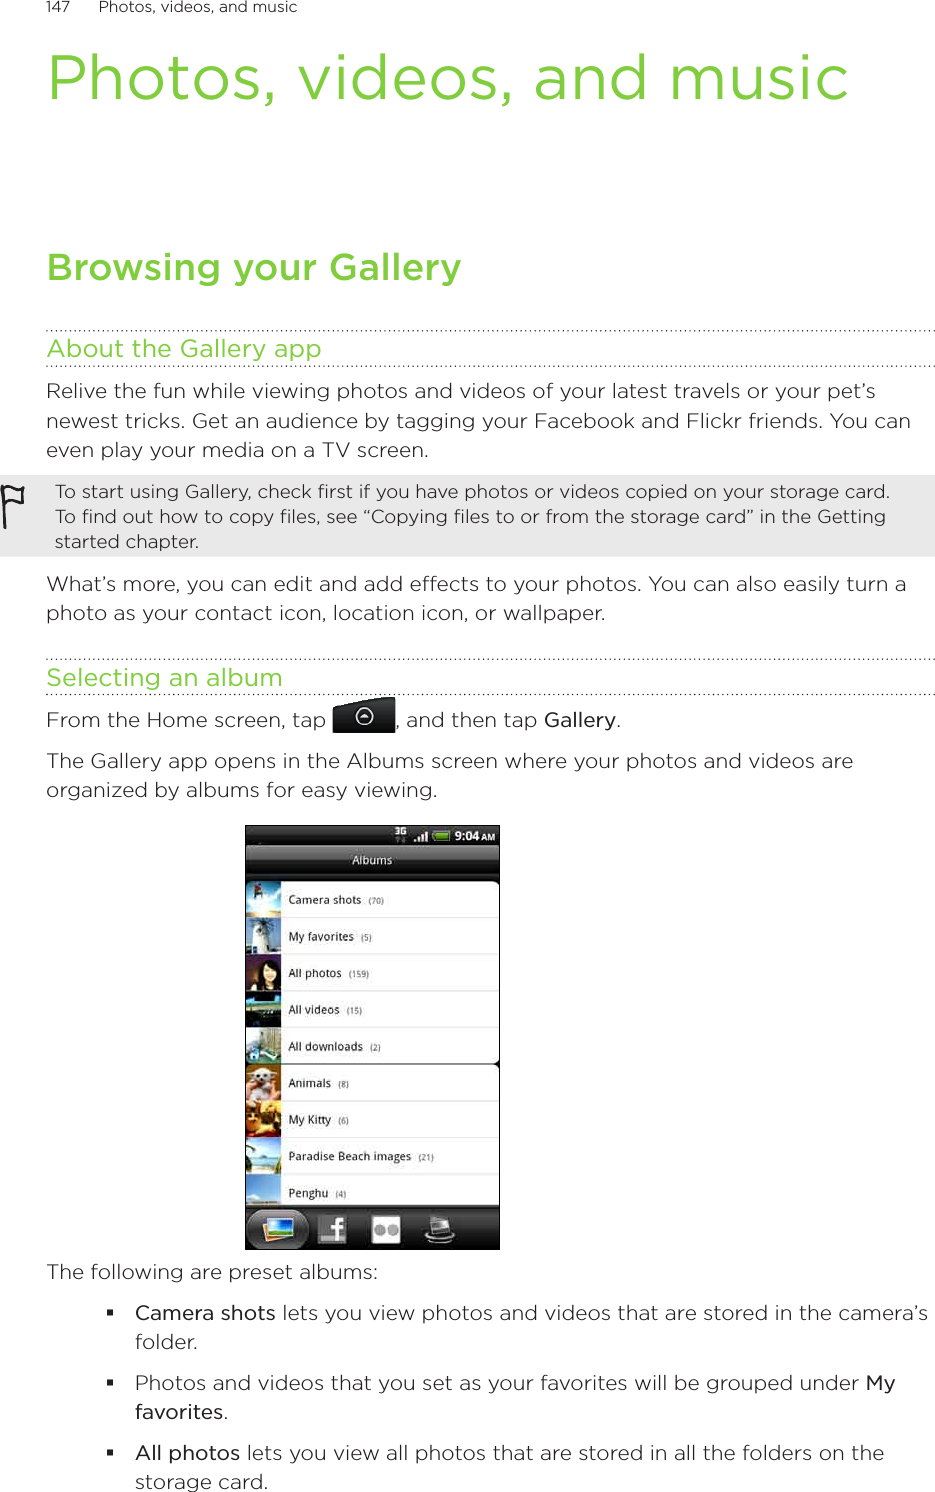 147      Photos, videos, and music      Photos, videos, and musicBrowsing your GalleryAbout the Gallery appRelive the fun while viewing photos and videos of your latest travels or your pet’s newest tricks. Get an audience by tagging your Facebook and Flickr friends. You can even play your media on a TV screen.To start using Gallery, check first if you have photos or videos copied on your storage card. To find out how to copy files, see “Copying files to or from the storage card” in the Getting started chapter.What’s more, you can edit and add effects to your photos. You can also easily turn a photo as your contact icon, location icon, or wallpaper.Selecting an albumFrom the Home screen, tap  , and then tap Gallery.The Gallery app opens in the Albums screen where your photos and videos are organized by albums for easy viewing.The following are preset albums:Camera shots lets you view photos and videos that are stored in the camera’s folder.Photos and videos that you set as your favorites will be grouped under My favorites.All photos lets you view all photos that are stored in all the folders on the storage card.